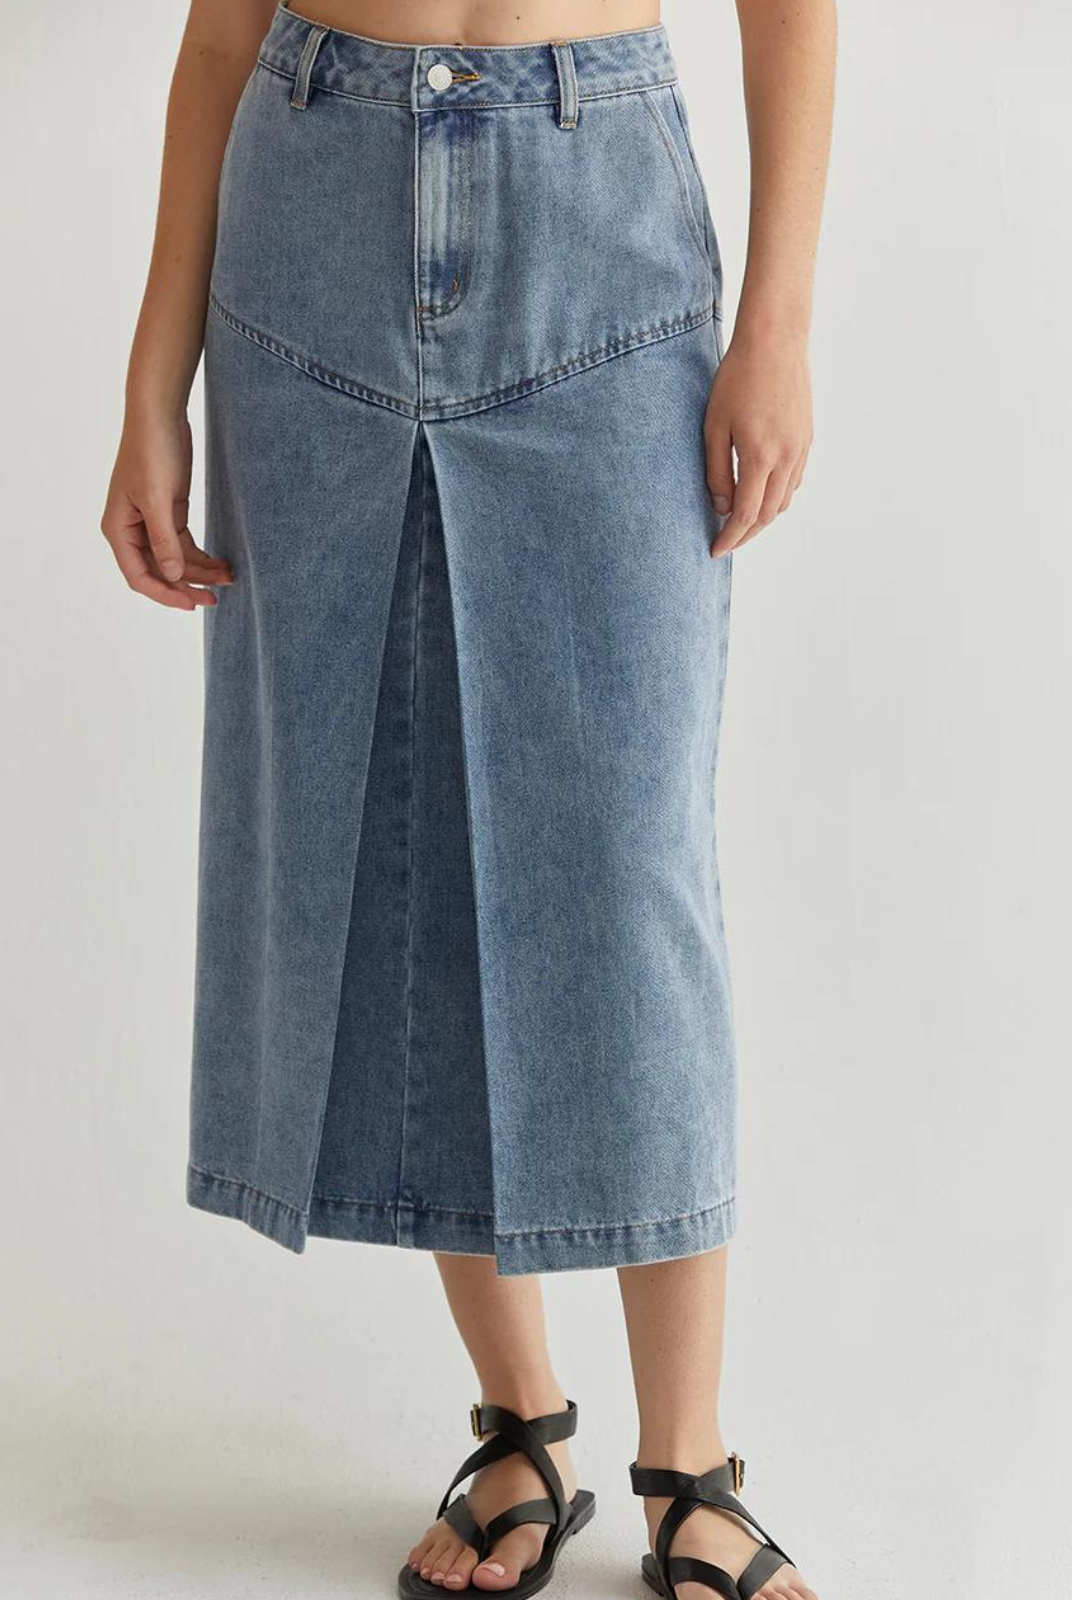 Brielle Denim Midi Skirt.The Brielle Denim Midi Skirt features a front button and zipper closure, side pockets, rear patch pocket, and angled seam on front hips that meets the inverted pleat detail.